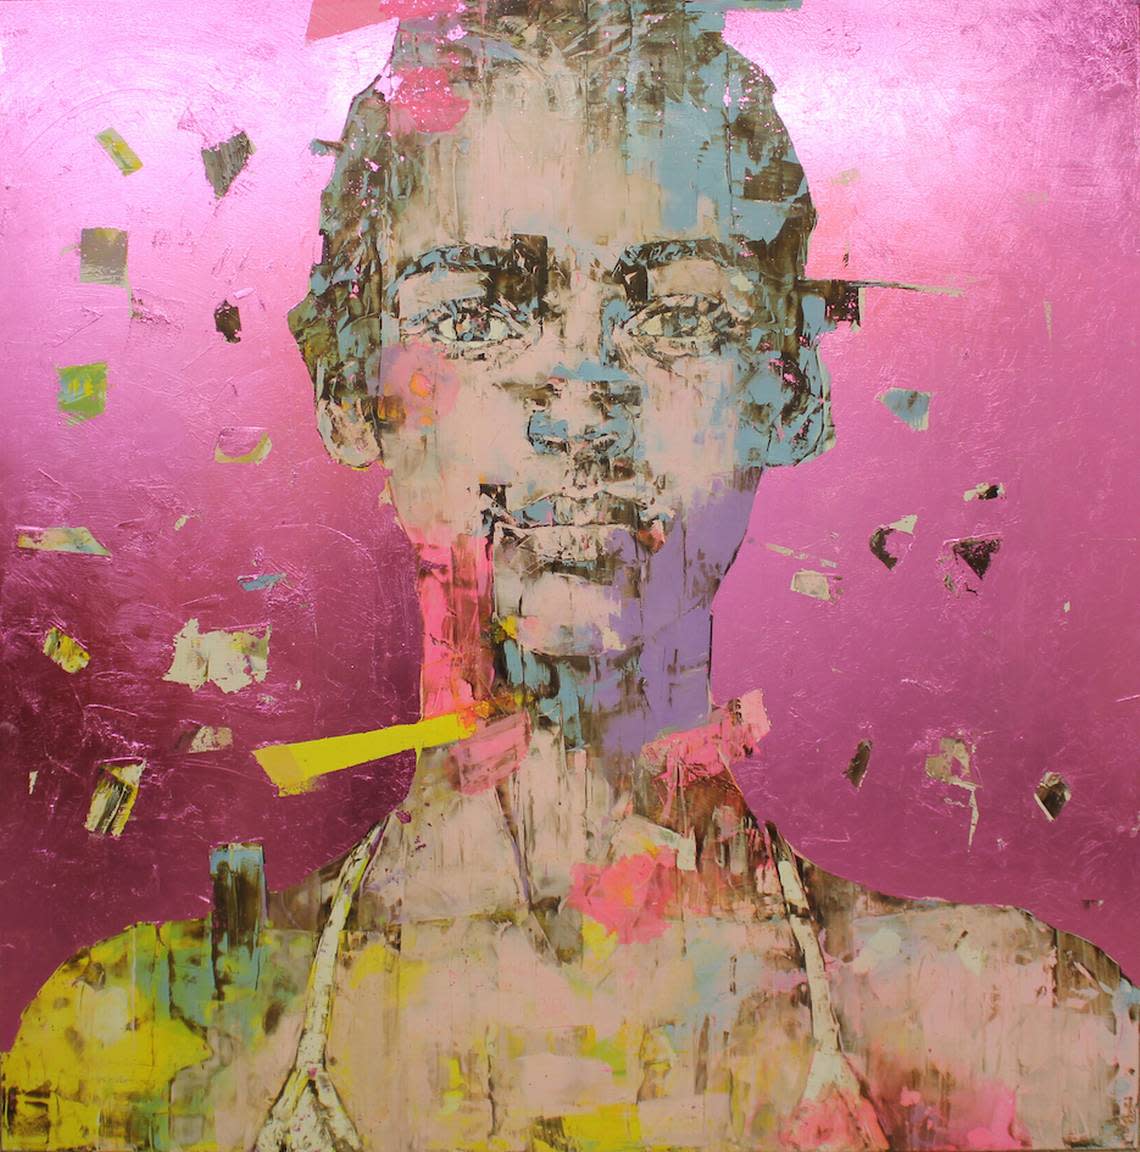 Marco Grassi’s “Pink experience n.731,” will be at Liquid Art System for this year’s Art Wynwood in downtown Miami. (Photo courtesy Liquid Art System)